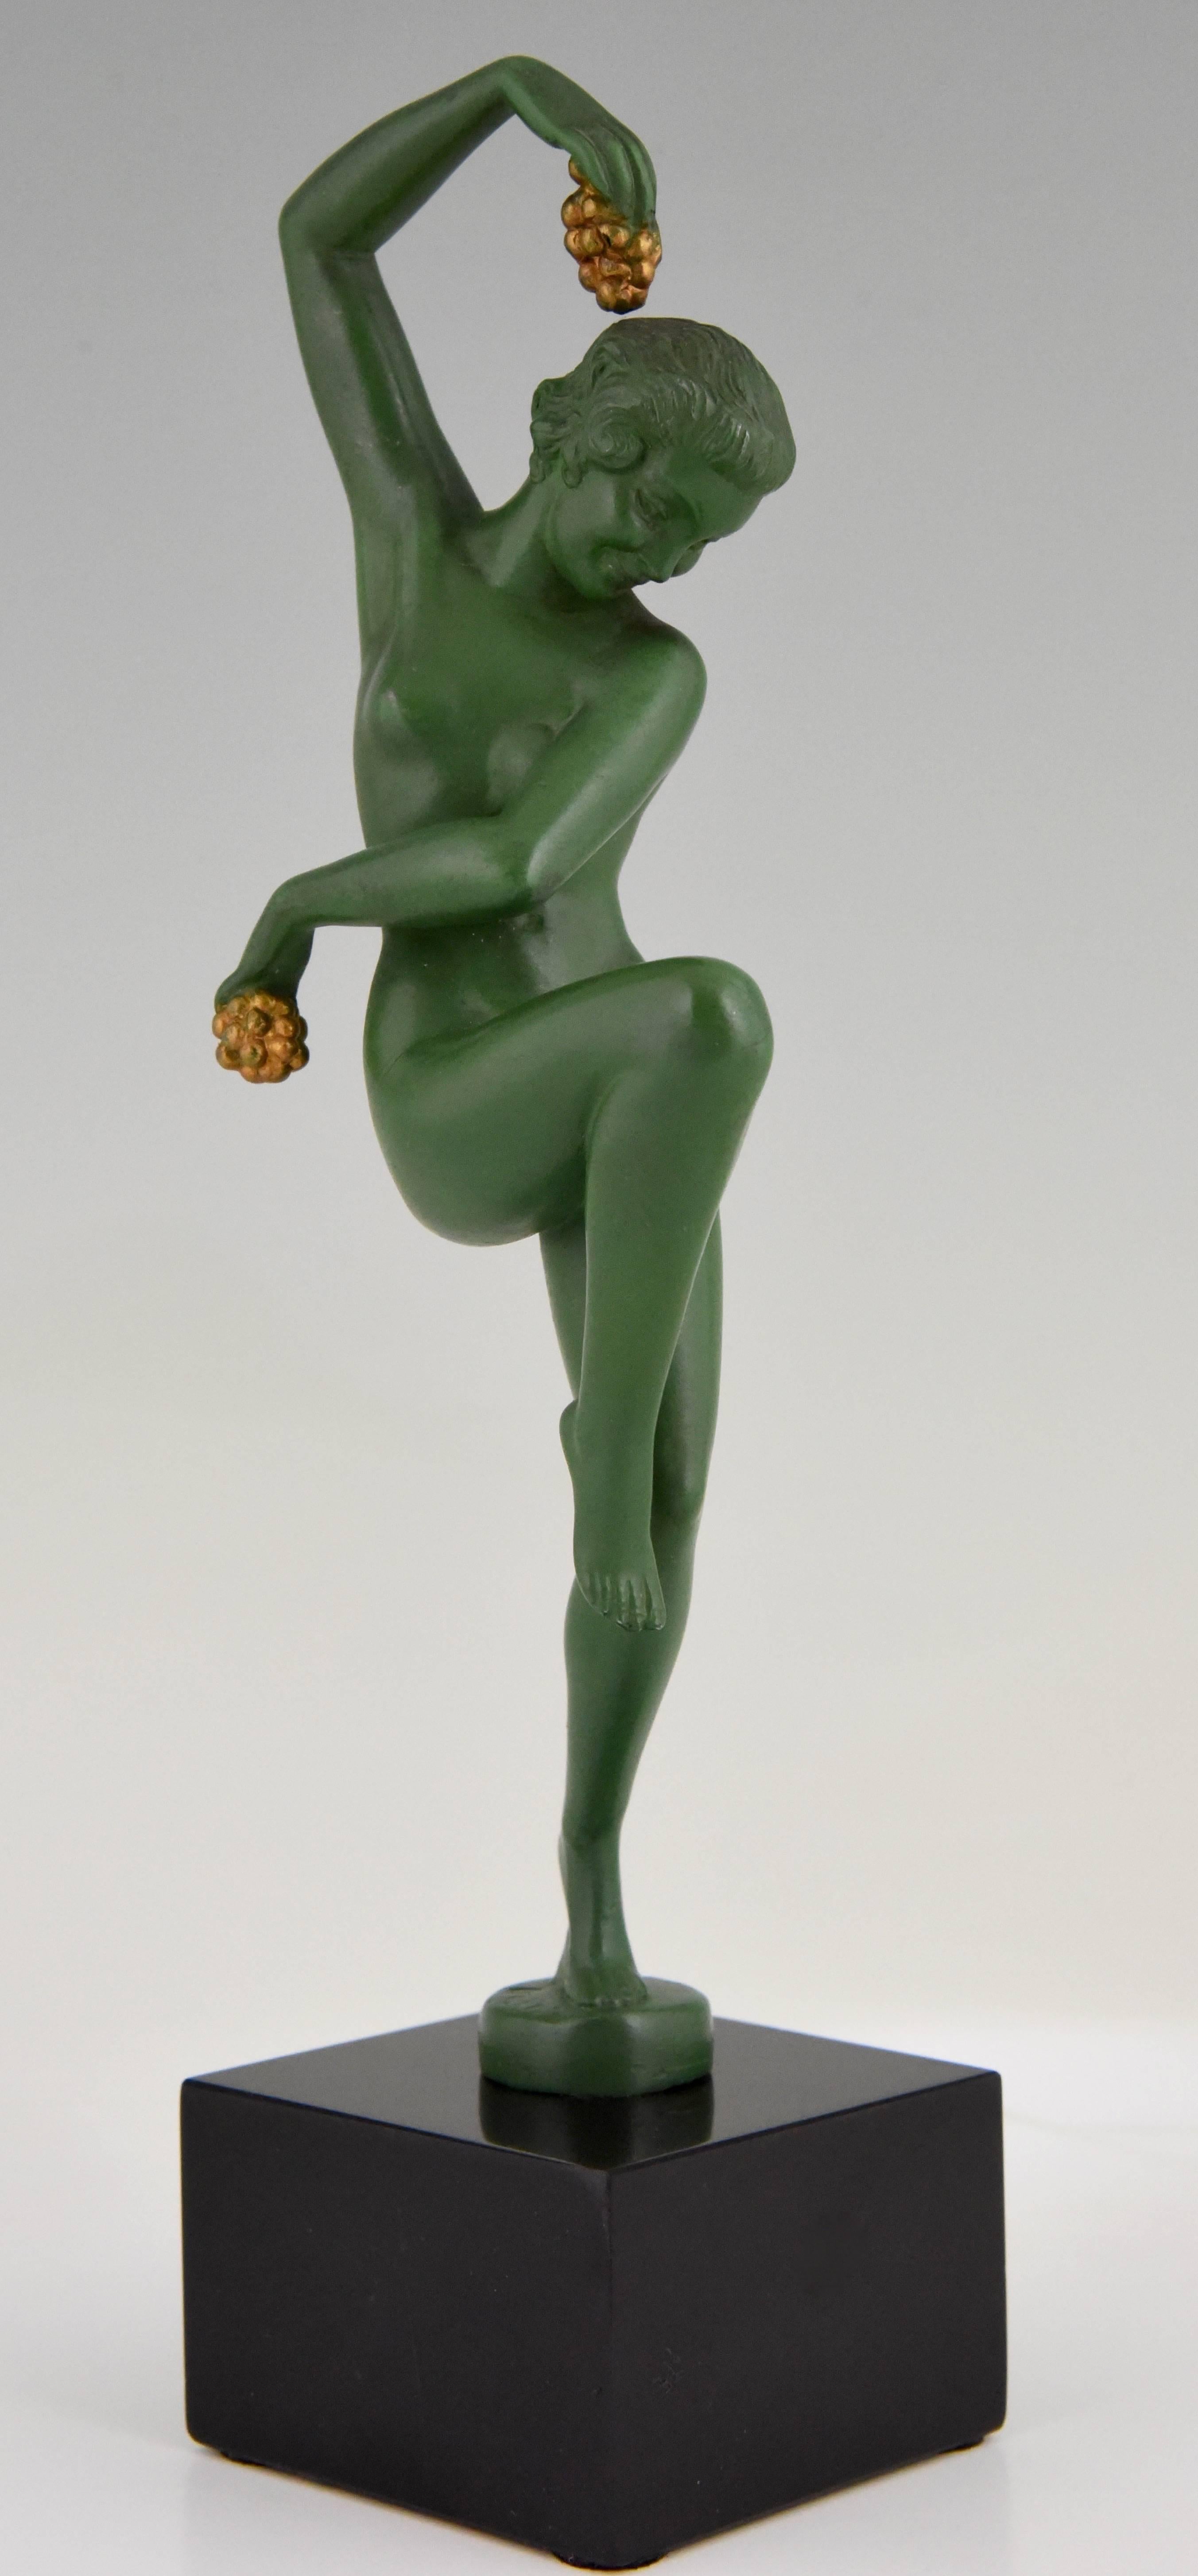 Elegant Art Deco sculpture of a nude dancer holding grapes by the French artist Denis on a Belgian Black marble base. Signature/ Marks: Denis.
Style: Art Deco
Date: 1930
Material: Patinated art metal. Belgian black marble base.
Origin: